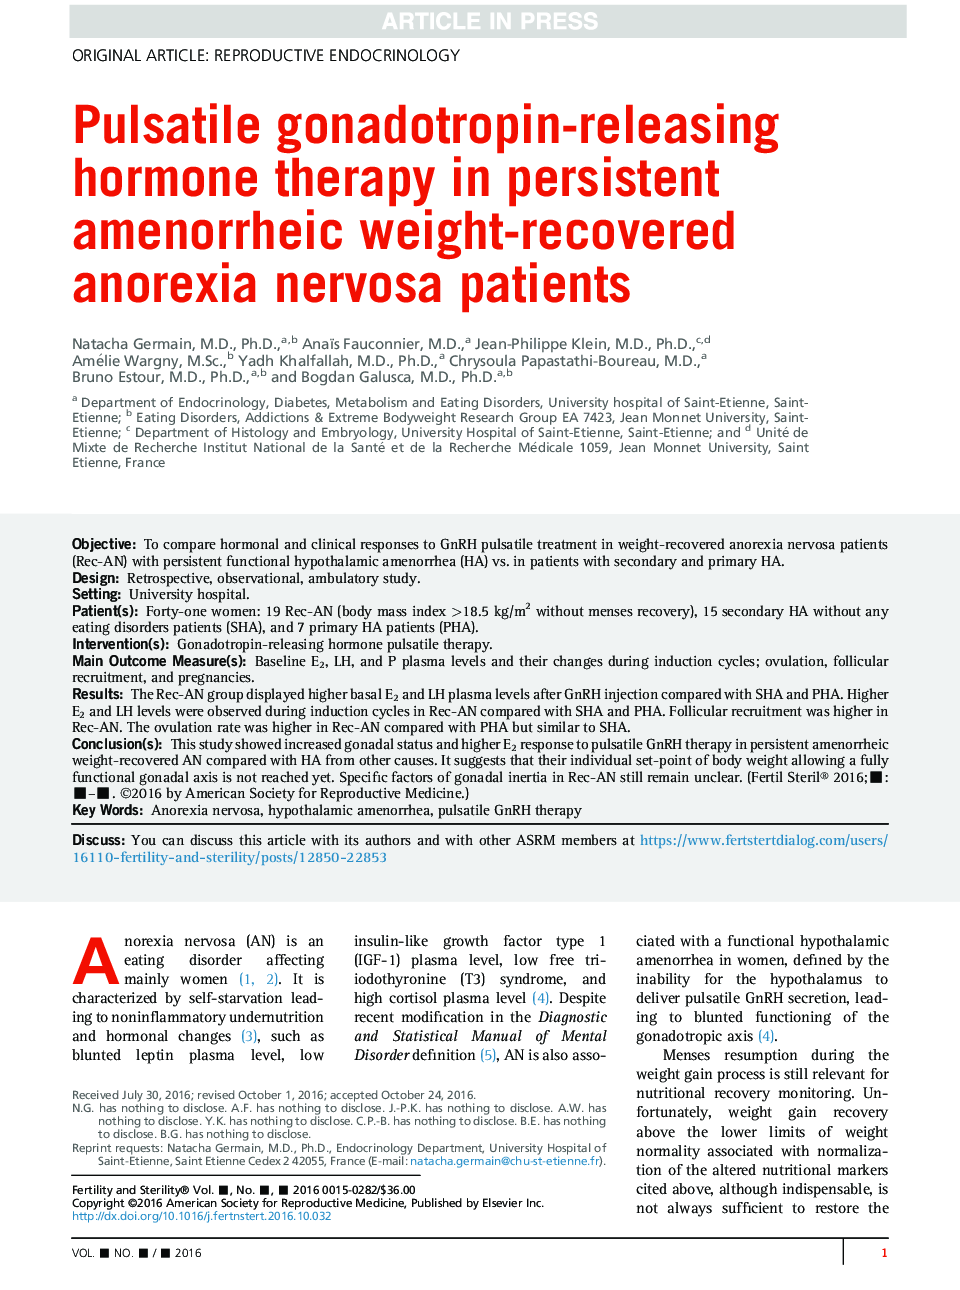 Pulsatile gonadotropin-releasing hormone therapy in persistent amenorrheic weight-recovered anorexia nervosa patients